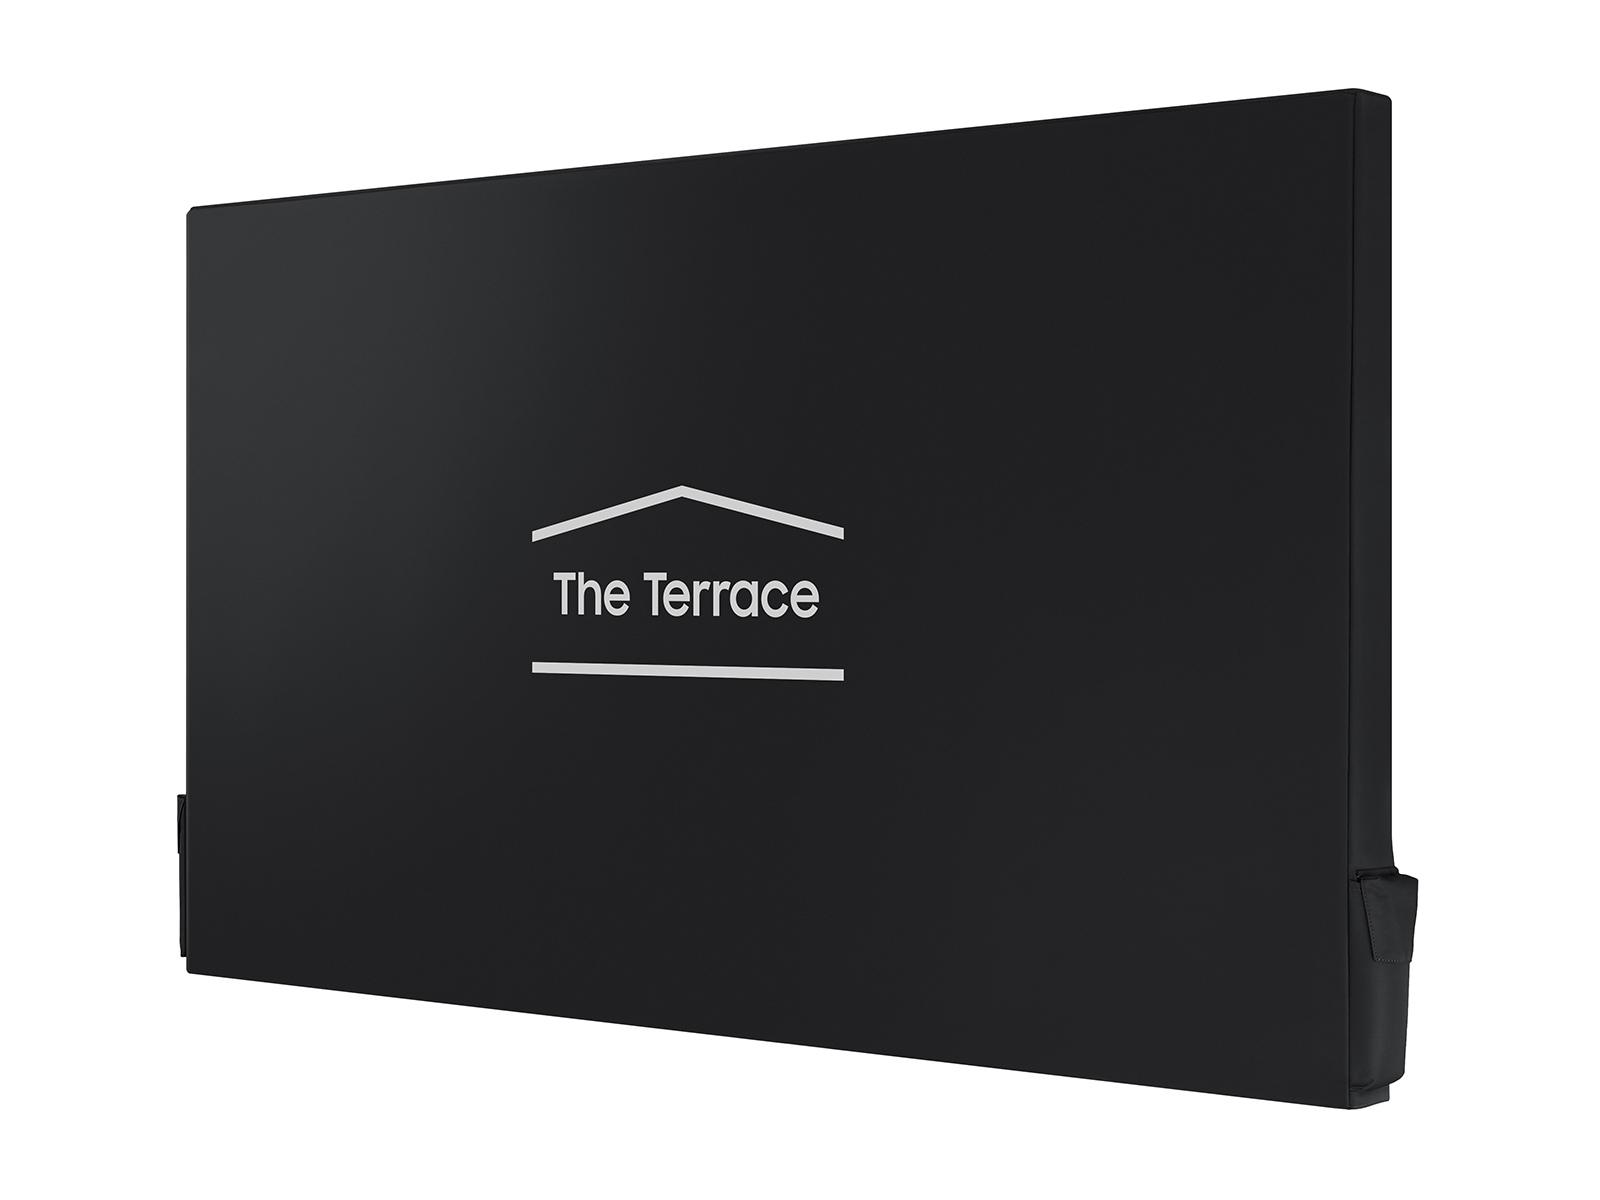 Thumbnail image of 65&quot; Class The Terrace Outdoor Dust Cover